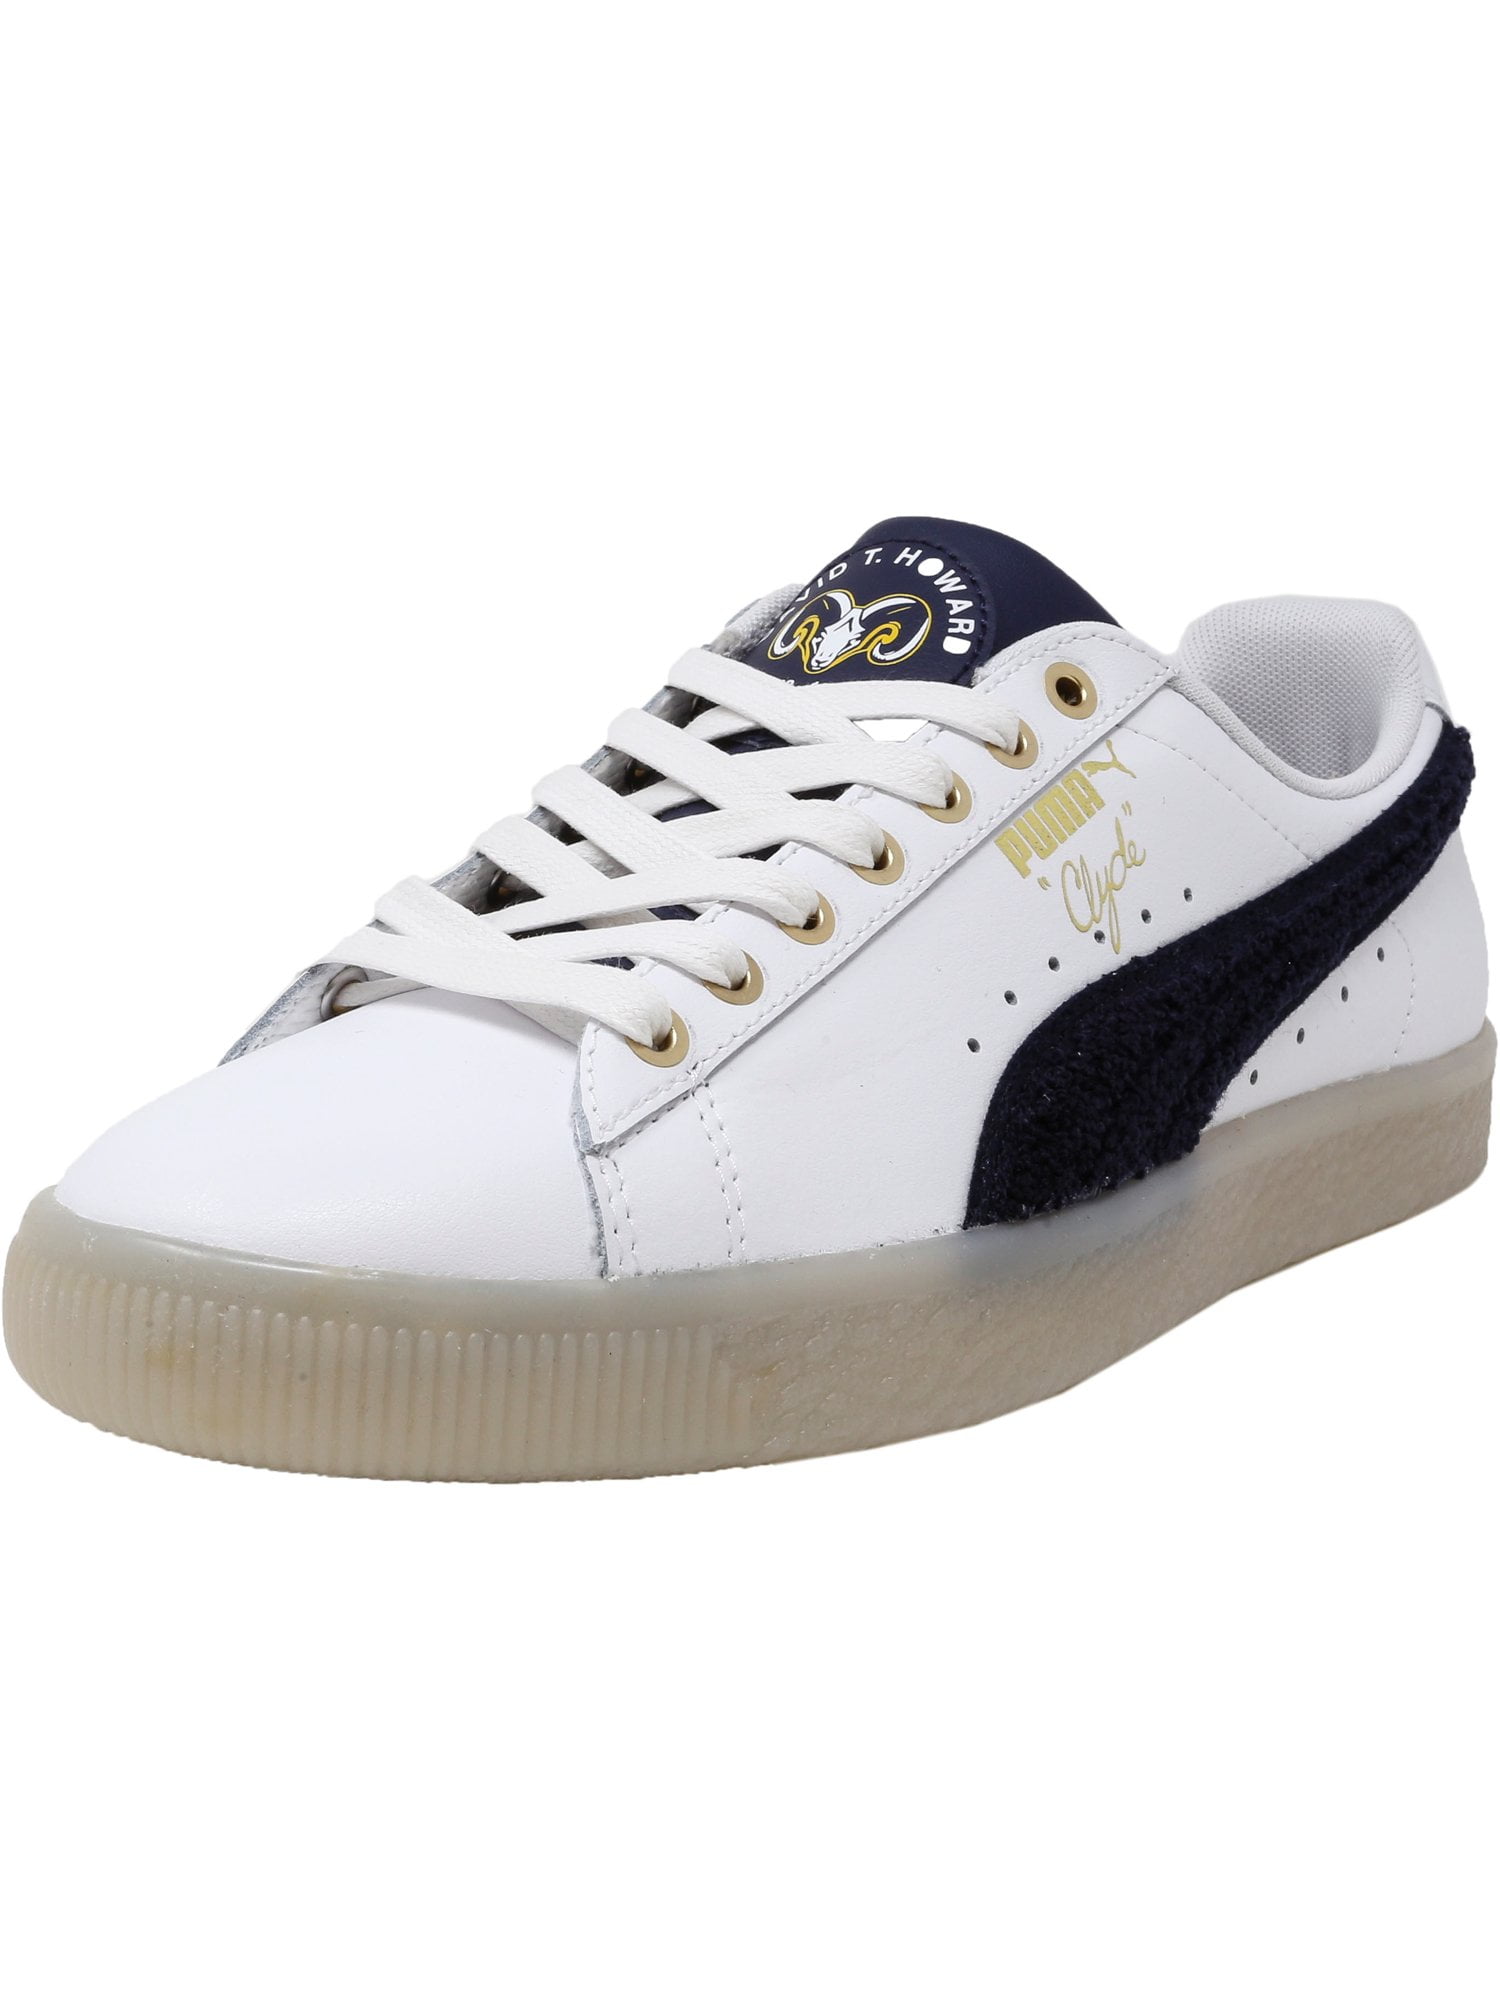 Puma Men's Clyde Leather Bhm White / Navy Spectra Yellow Ankle-High ...